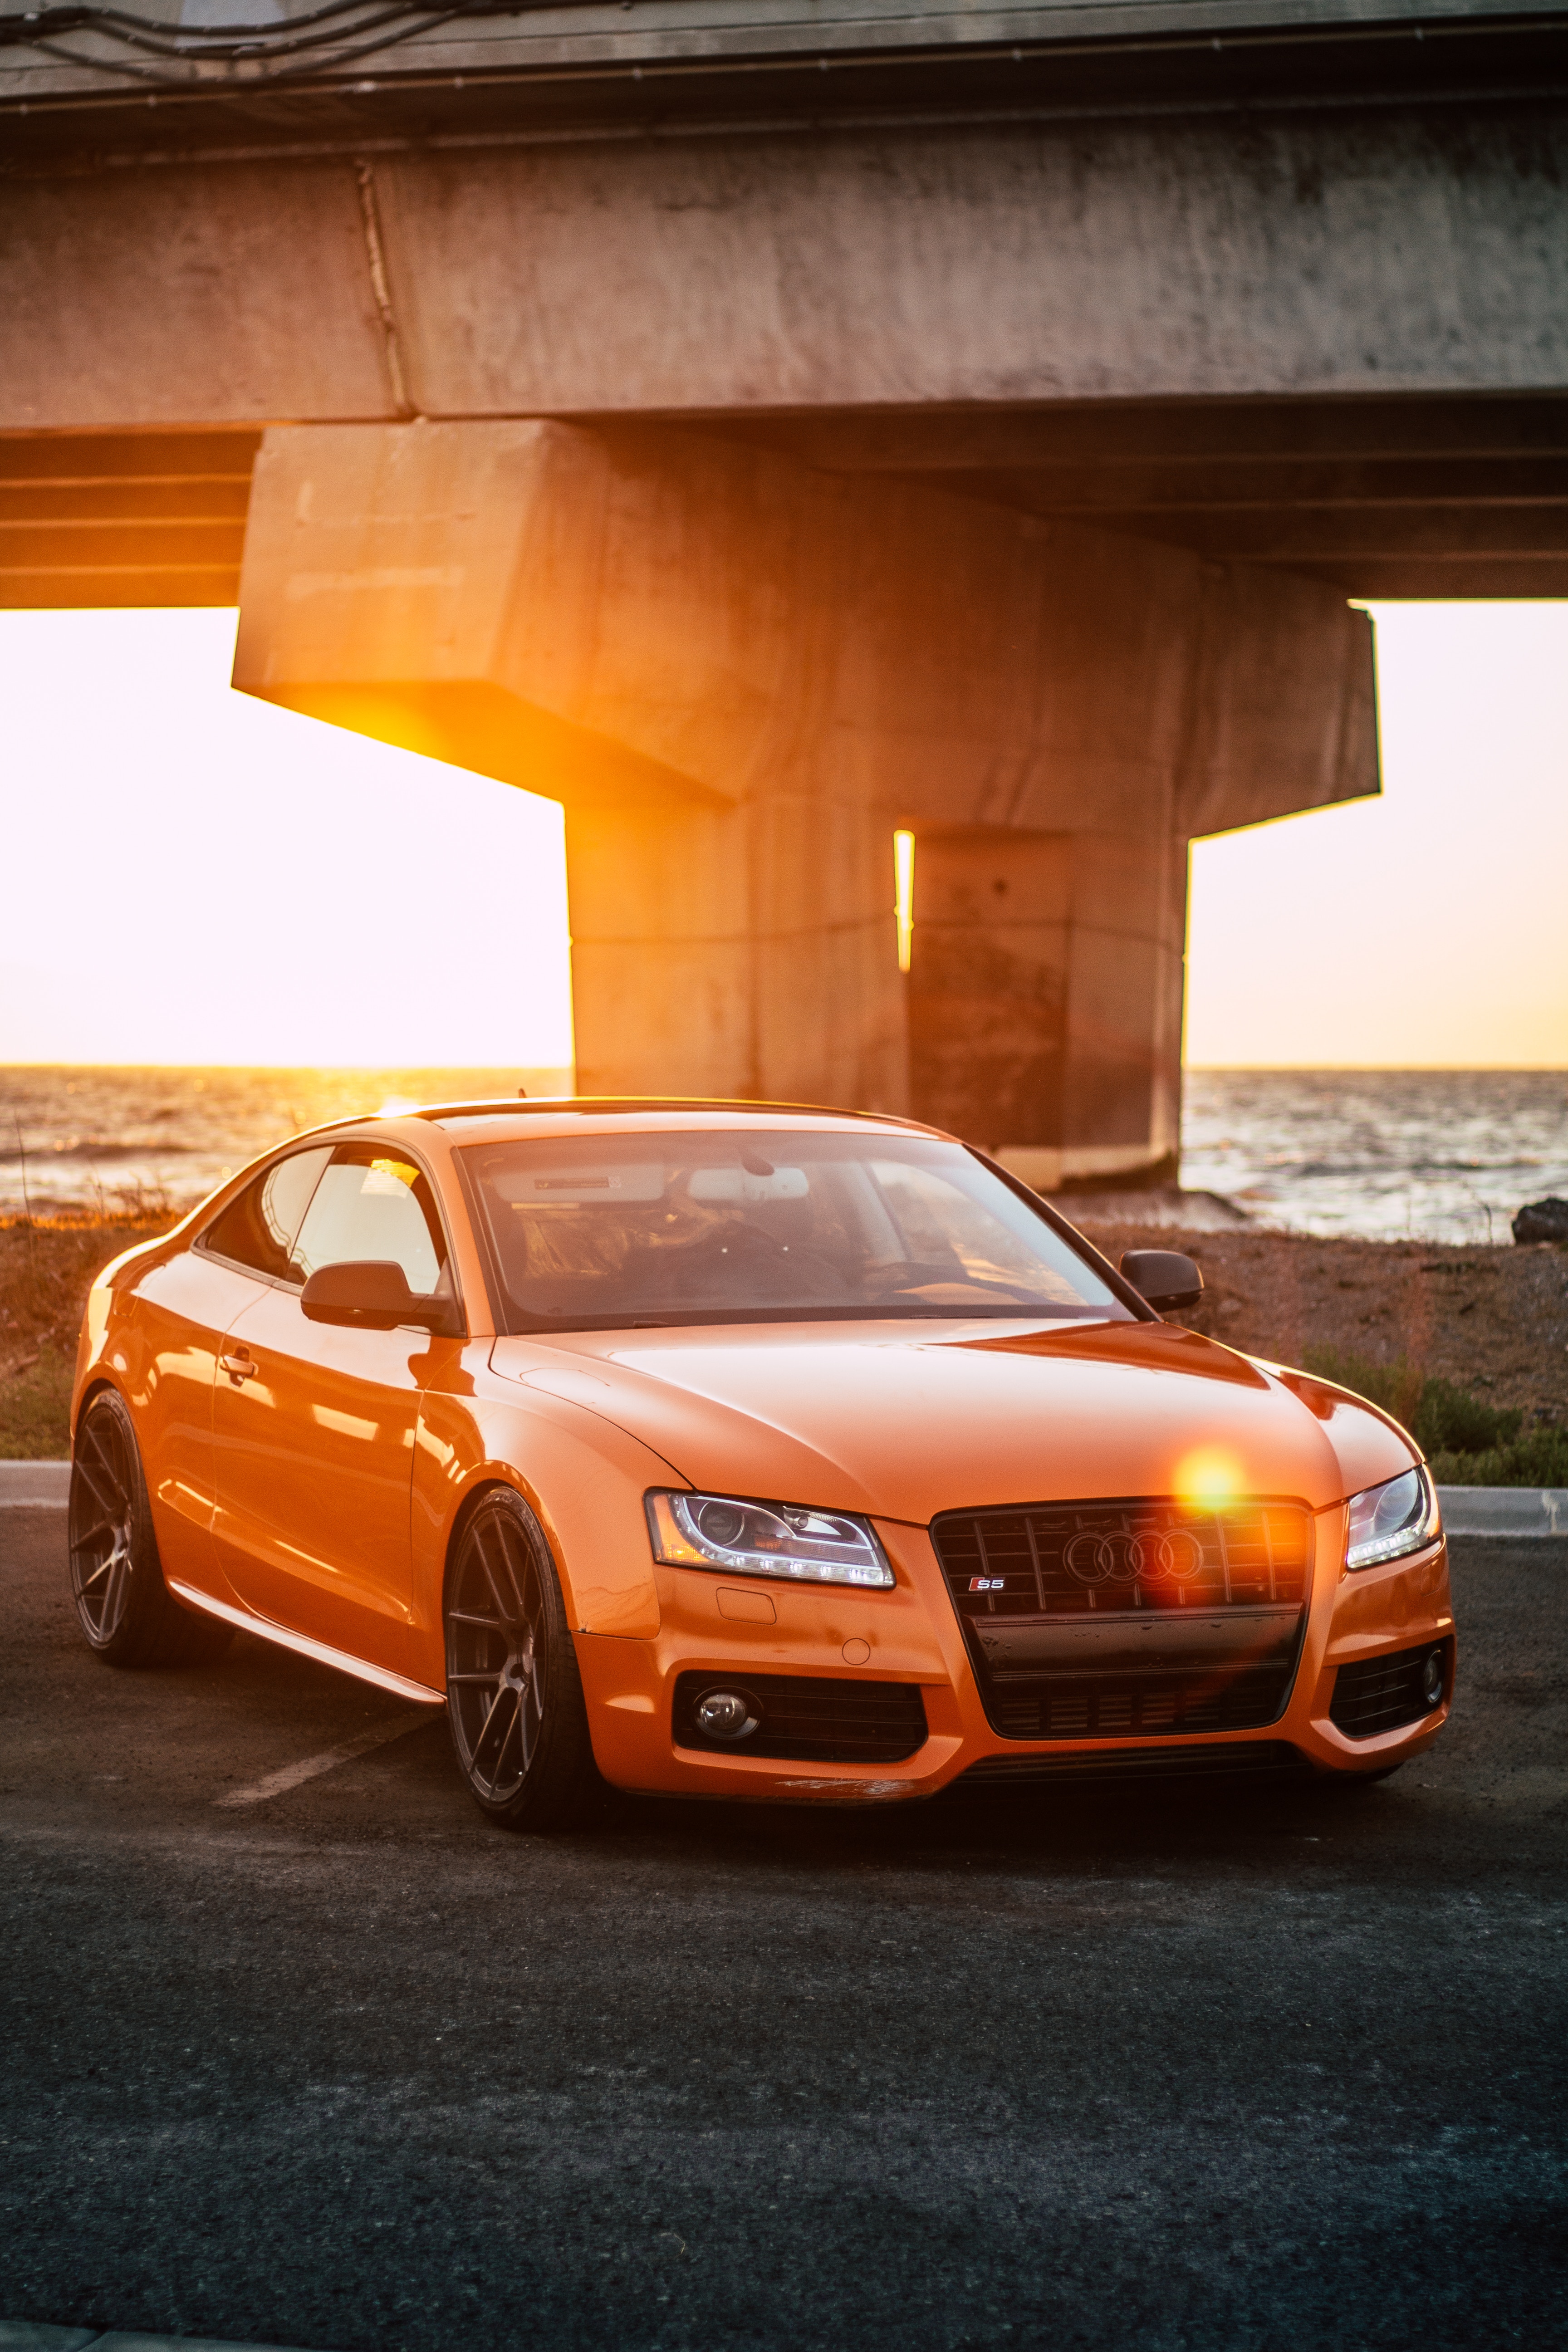 146715 free download Orange wallpapers for phone, cars, glare, auto, side view Orange images and screensavers for mobile